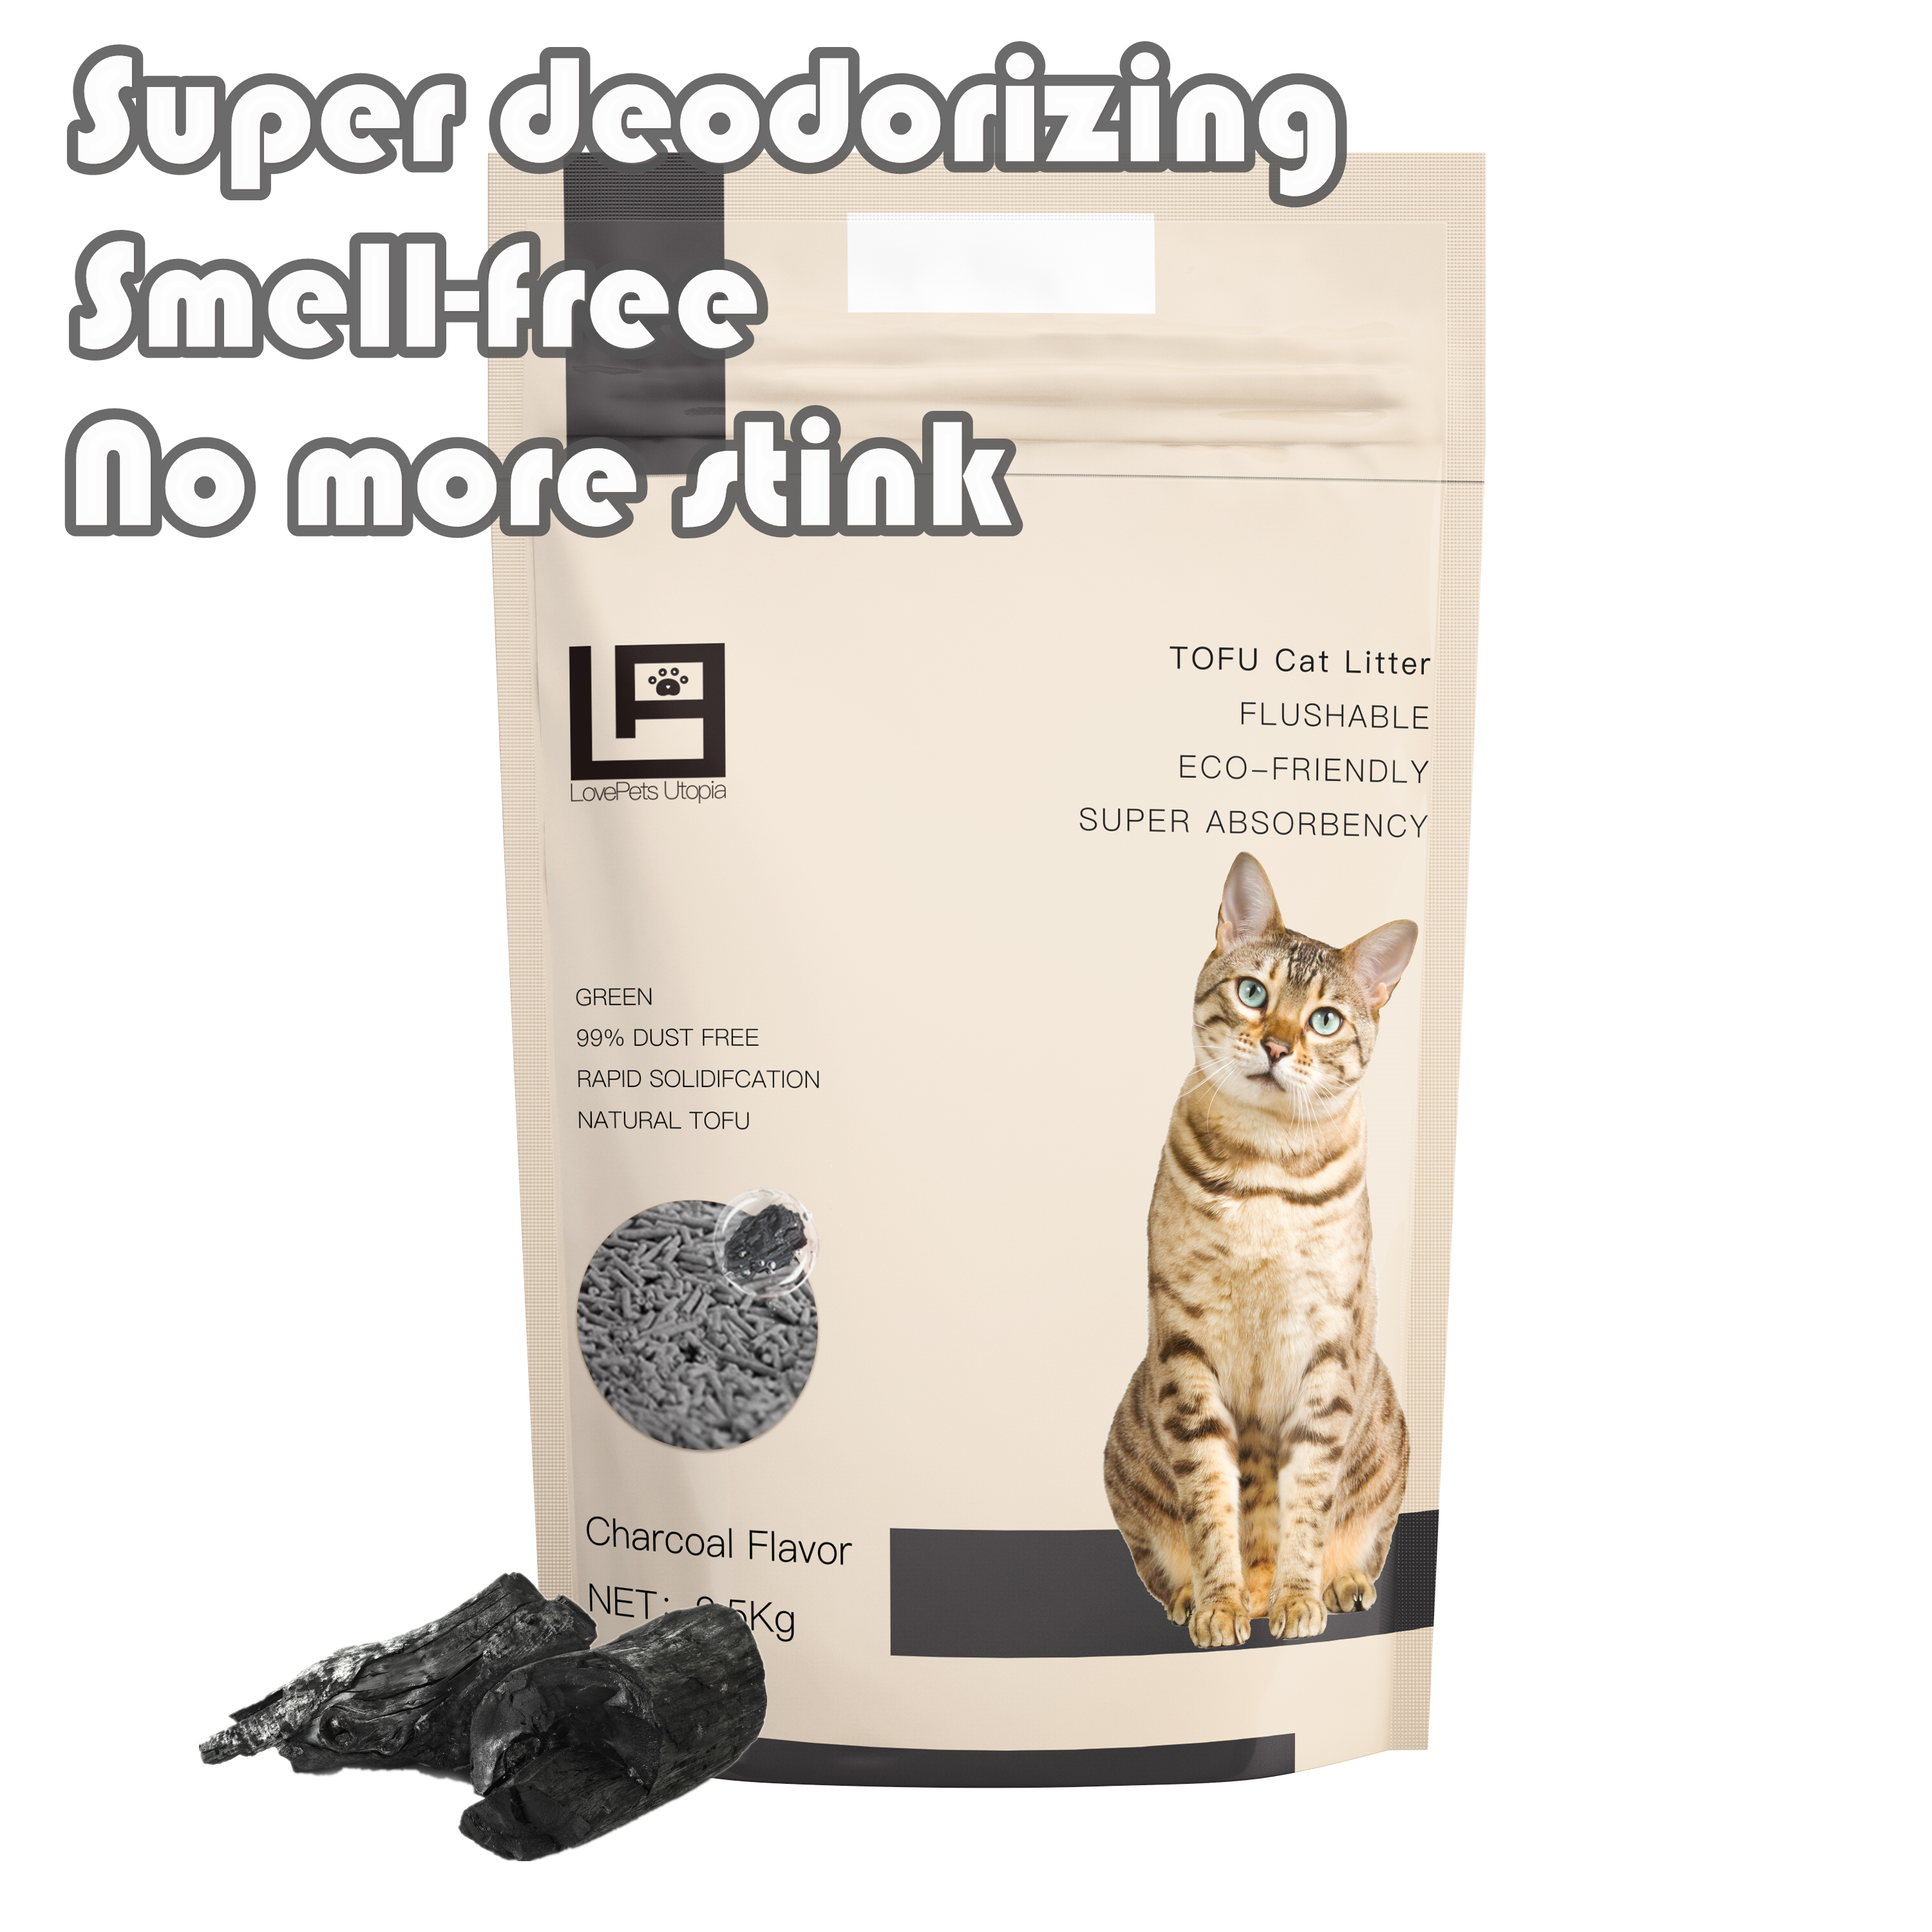 Love Pets Utopia Natural Charcoal Flavor Tofu Cat Litter Featured Image